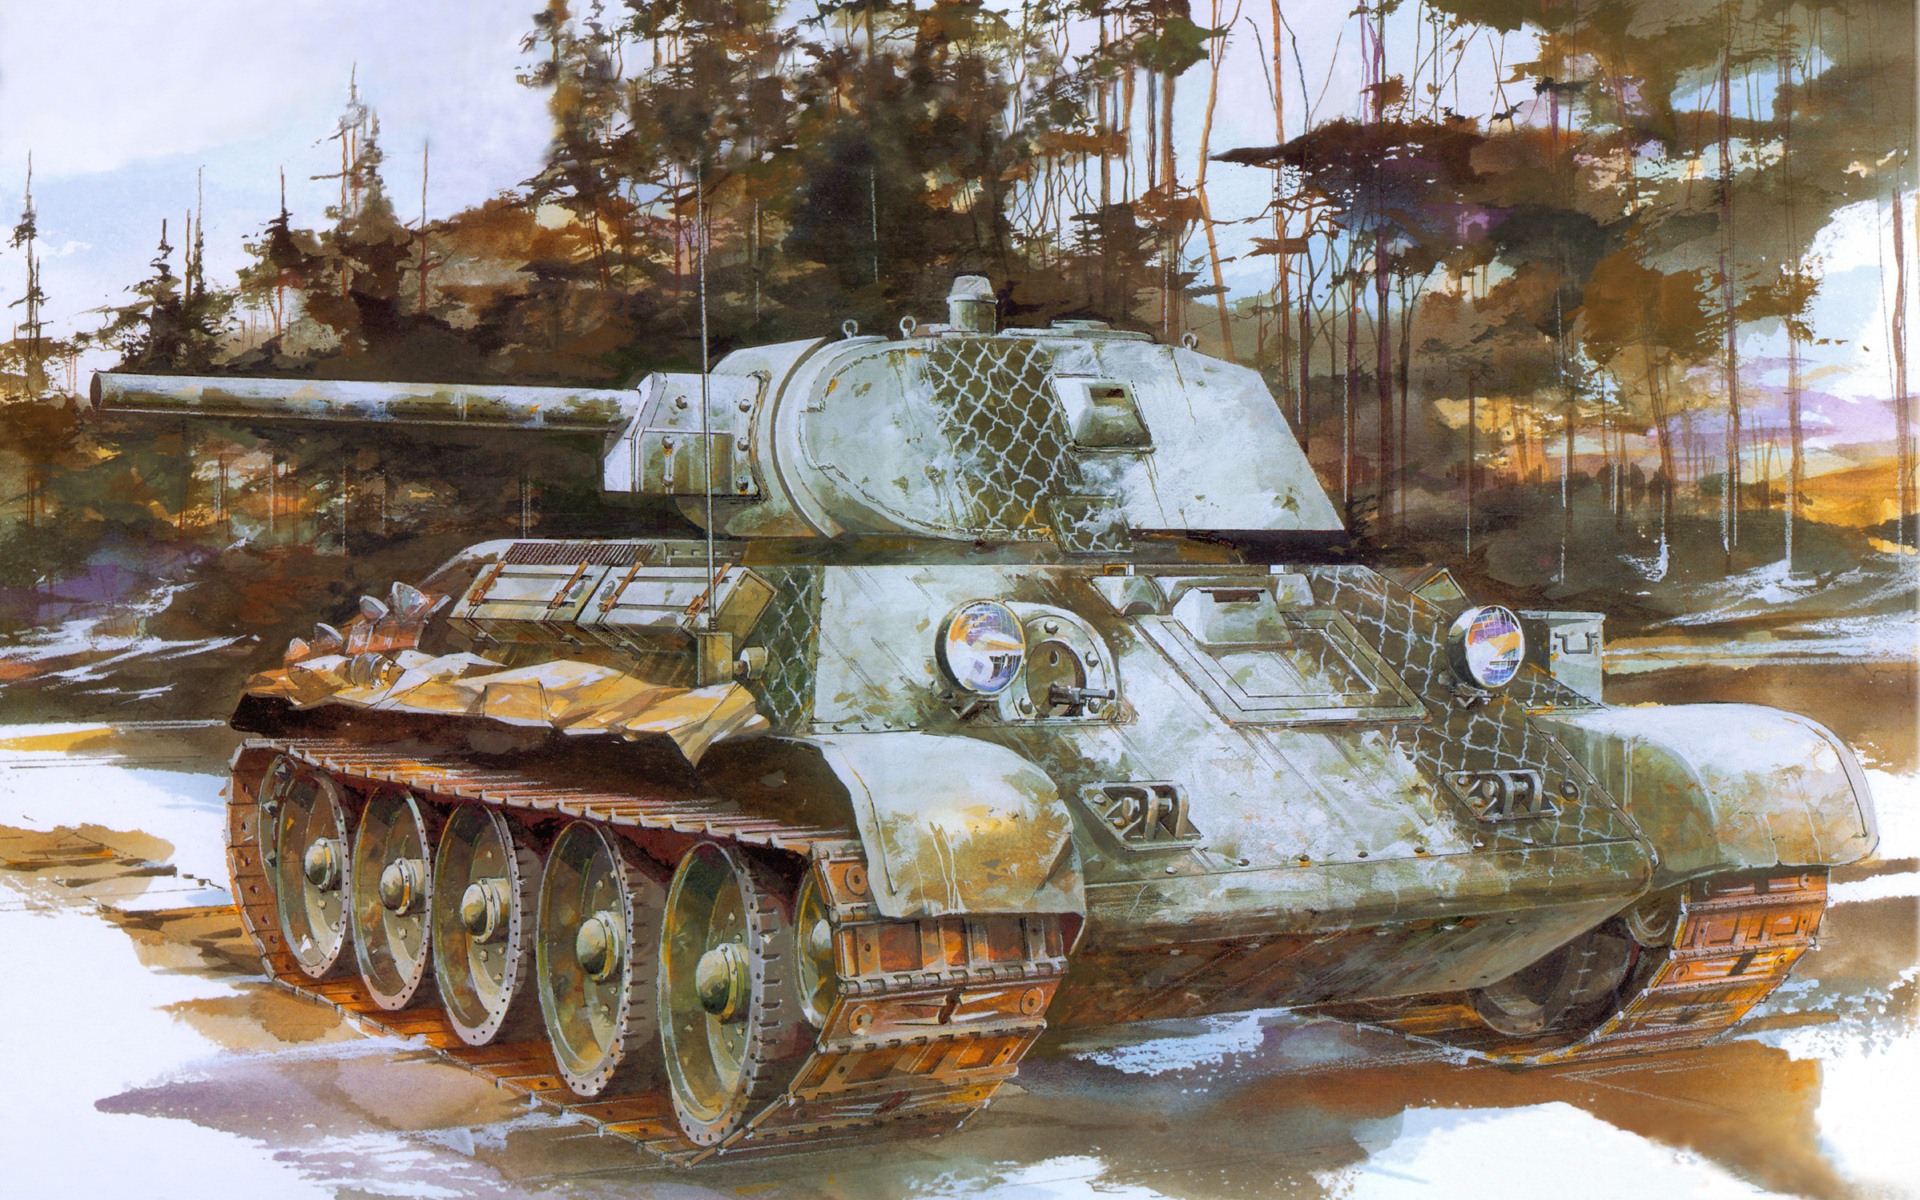 Military tanks, armored HD painting wallpapers #8 - 1920x1200